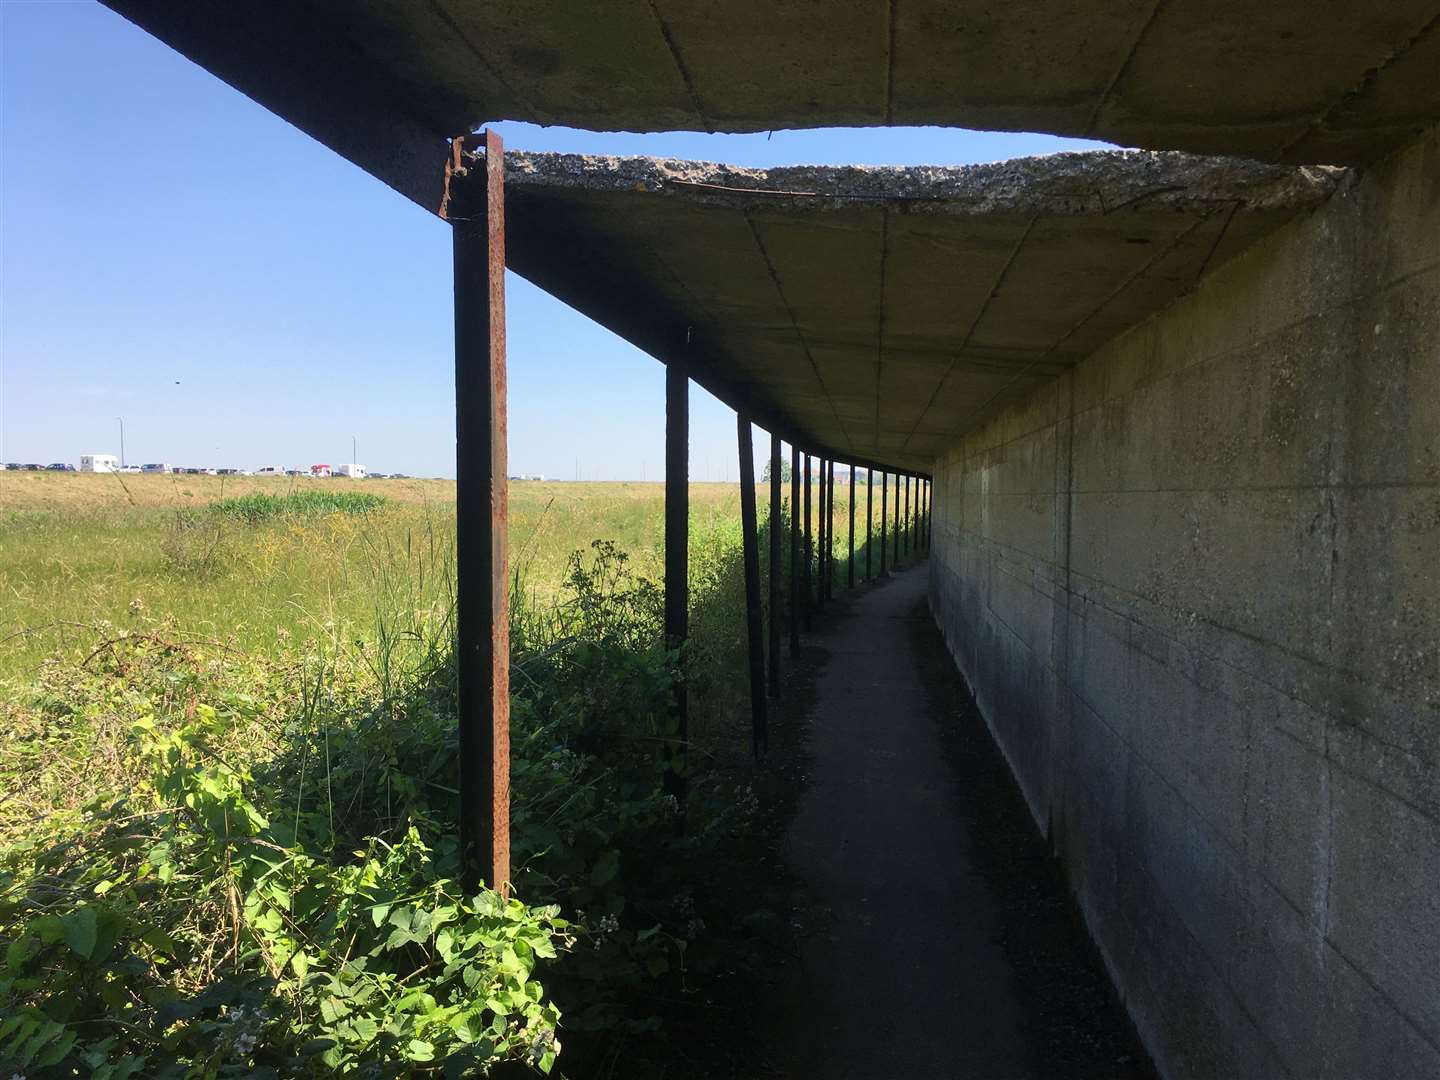 The 'covered way' at Barton's Point Coastal Park, Sheerness, is in a sorry state as its iron supports rust and its concrete roof crumbles.